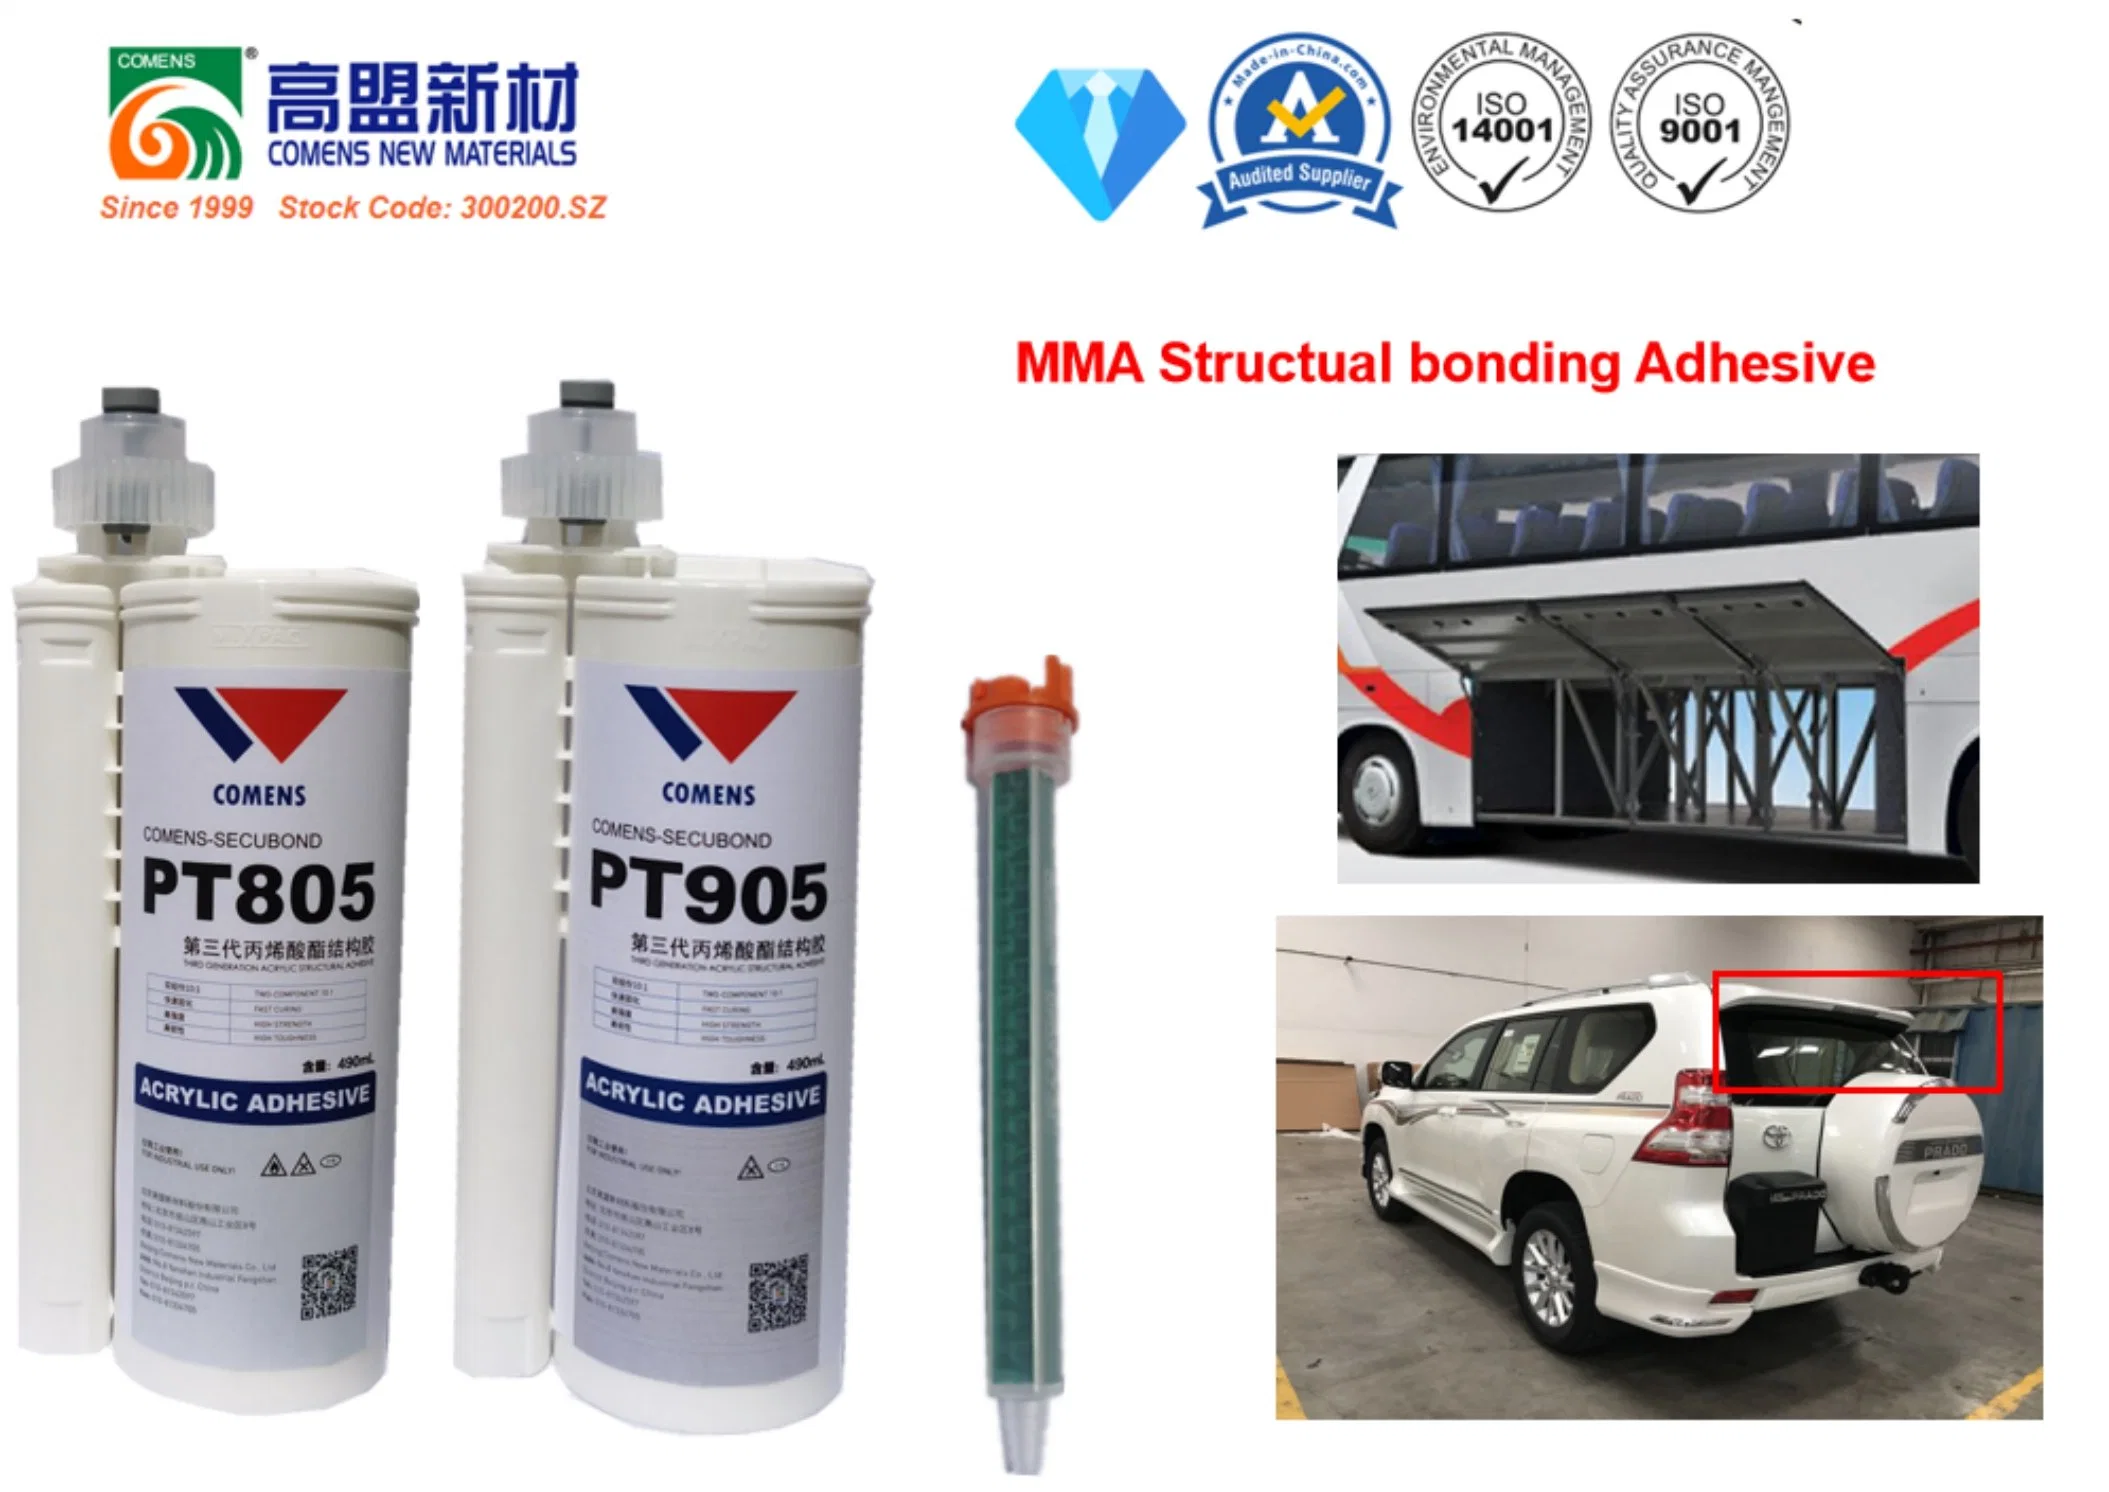 Weather Resistant Two-Component Structual Adhesive for Bus Trim Assembly (PT905)